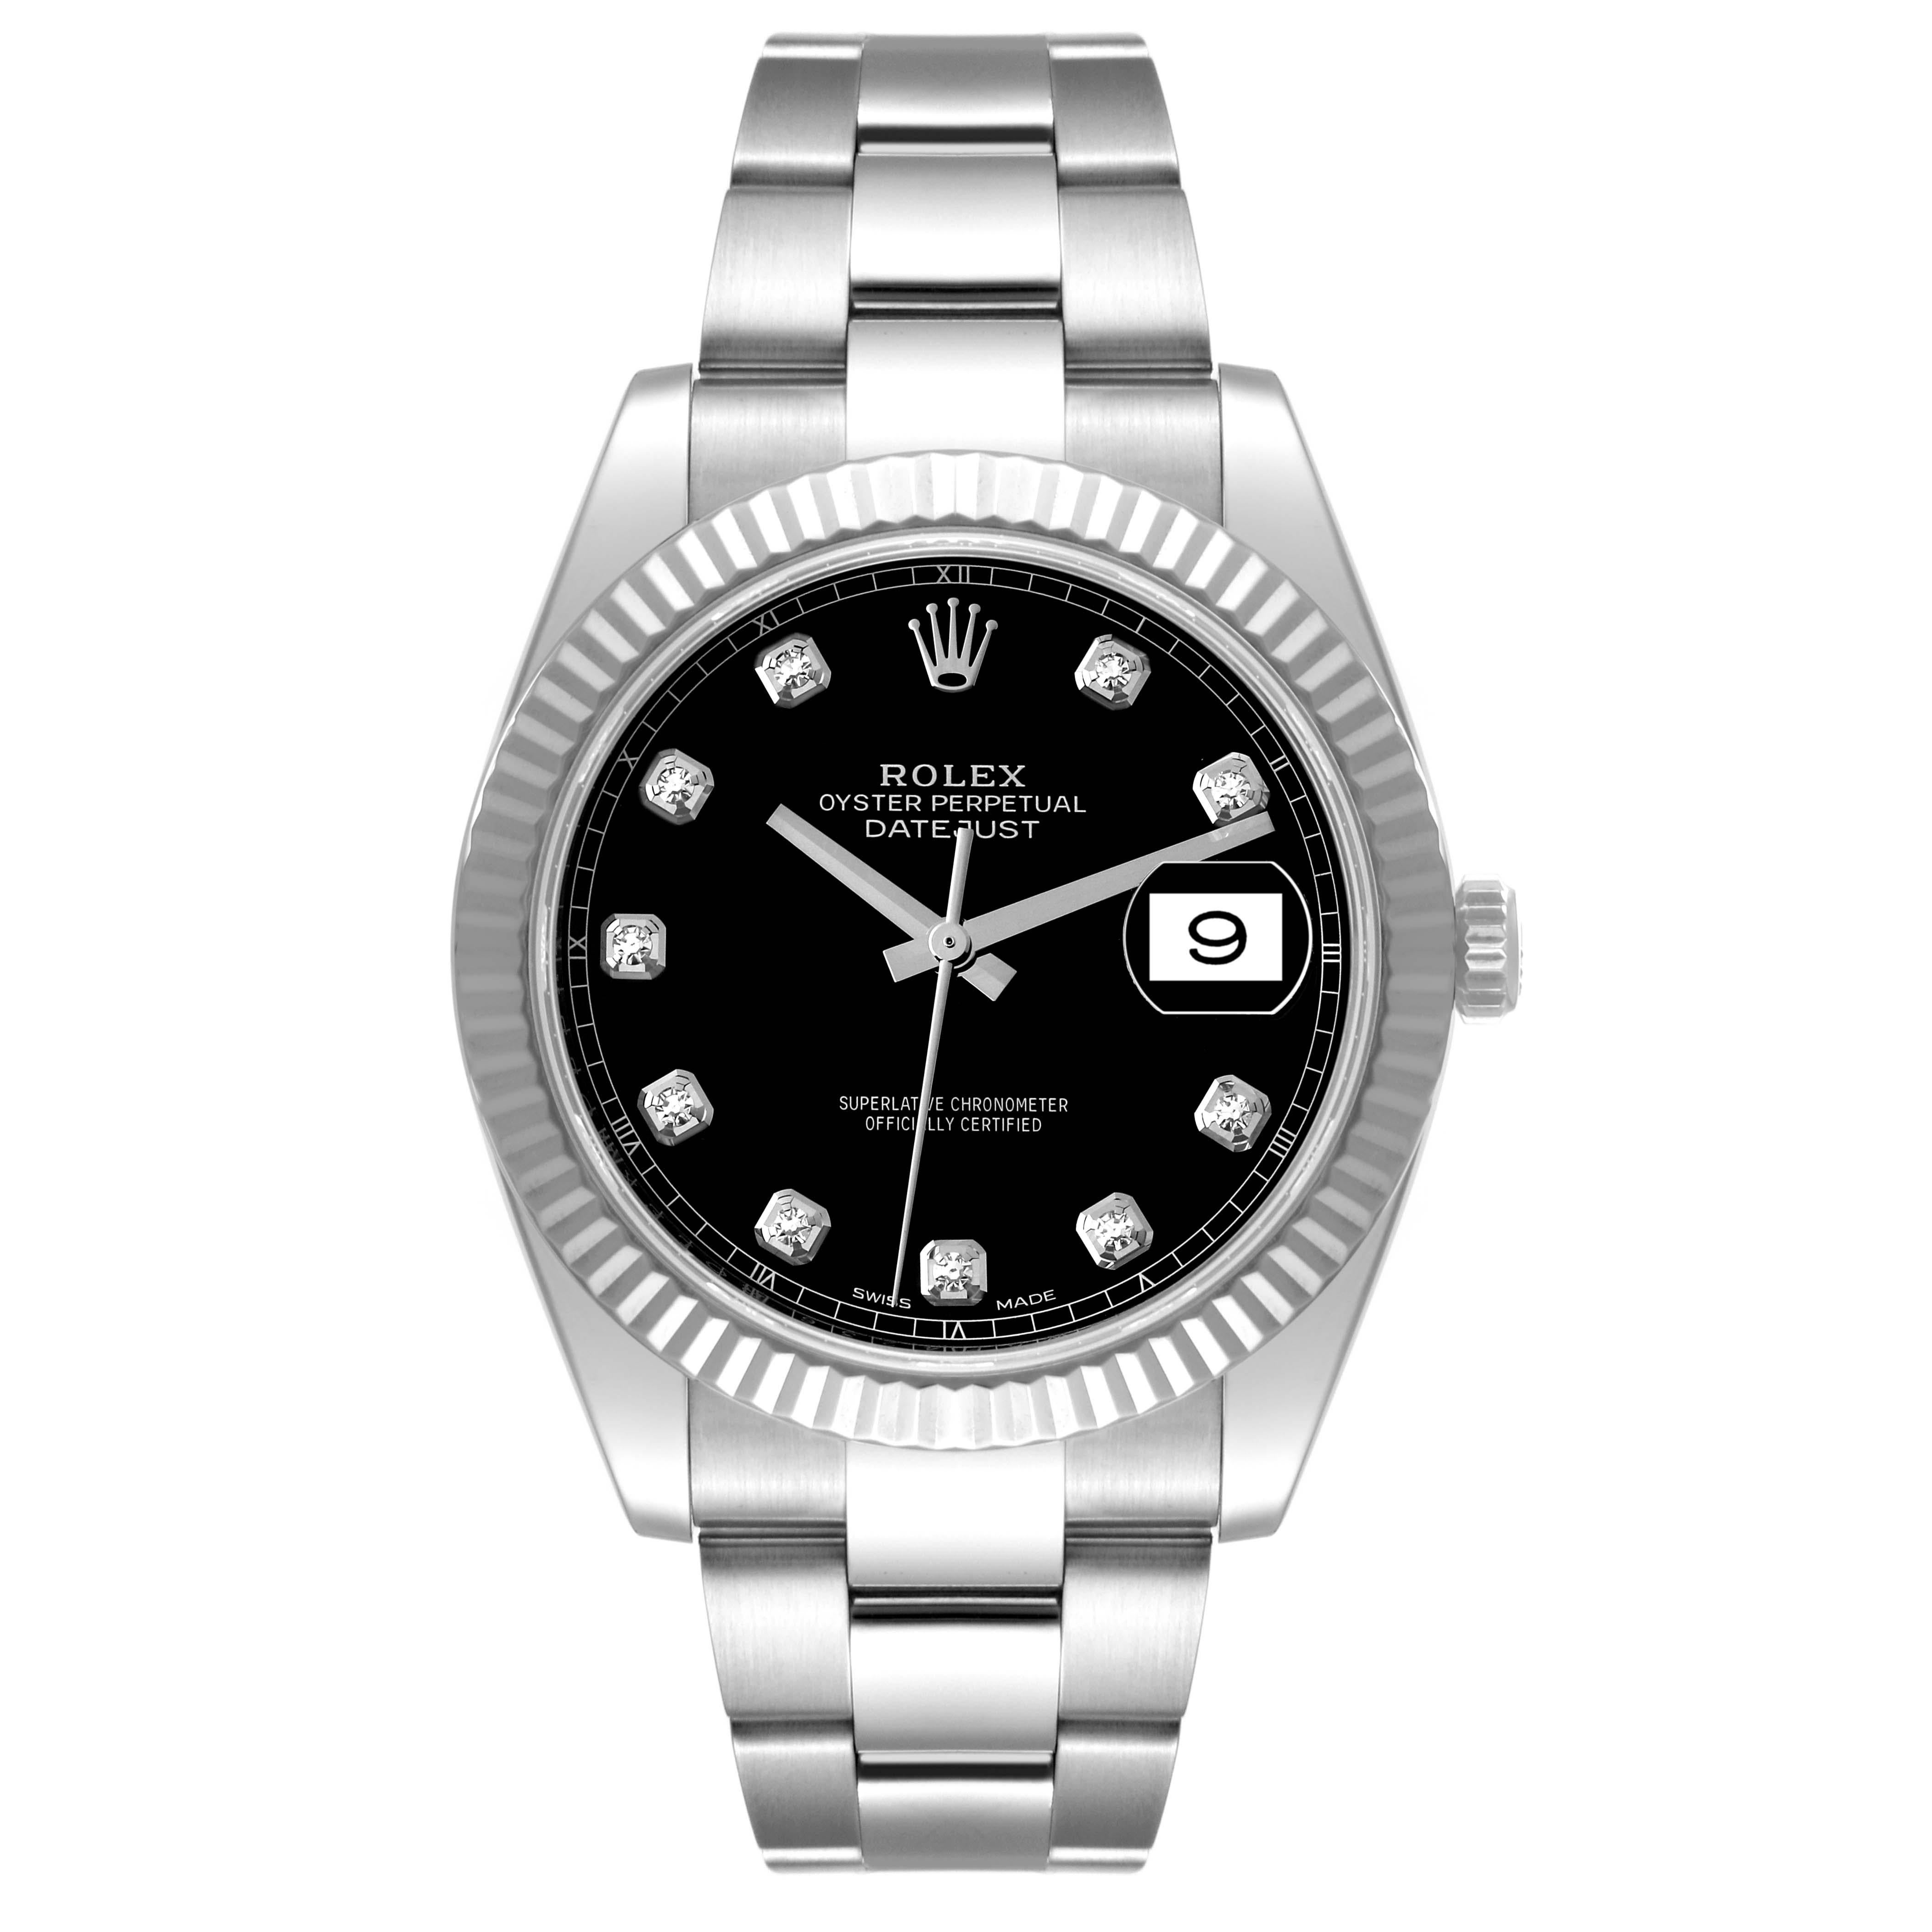 Rolex Datejust 41 Steel White Gold Black Diamond Dial Mens Watch 126334 Box Card. Officially certified chronometer automatic self-winding movement. Stainless steel case 41 mm in diameter. Rolex logo on a crown. 18K white gold fluted bezel. Scratch